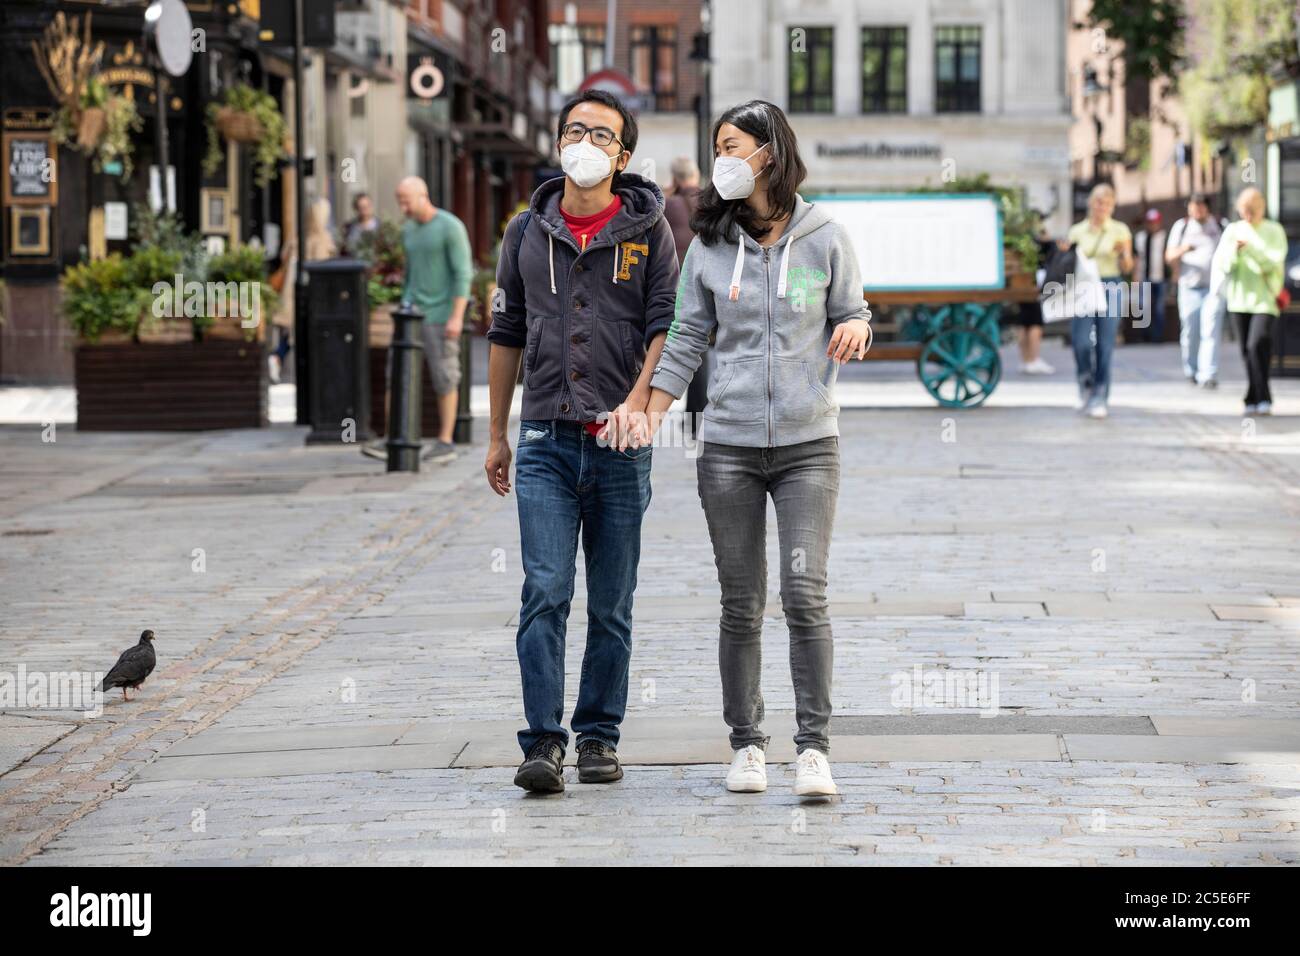 Covent Garden, London, UK/ 2nd July 2020. A couple wearing face masks walk along the piazza in Covent garden before Super Saturday ahead of the coronavirus lockdown restrictions being relaxed and restaurants and bars open this weekend across London, UK Credit: Clickpics/Alamy Live News Stock Photo